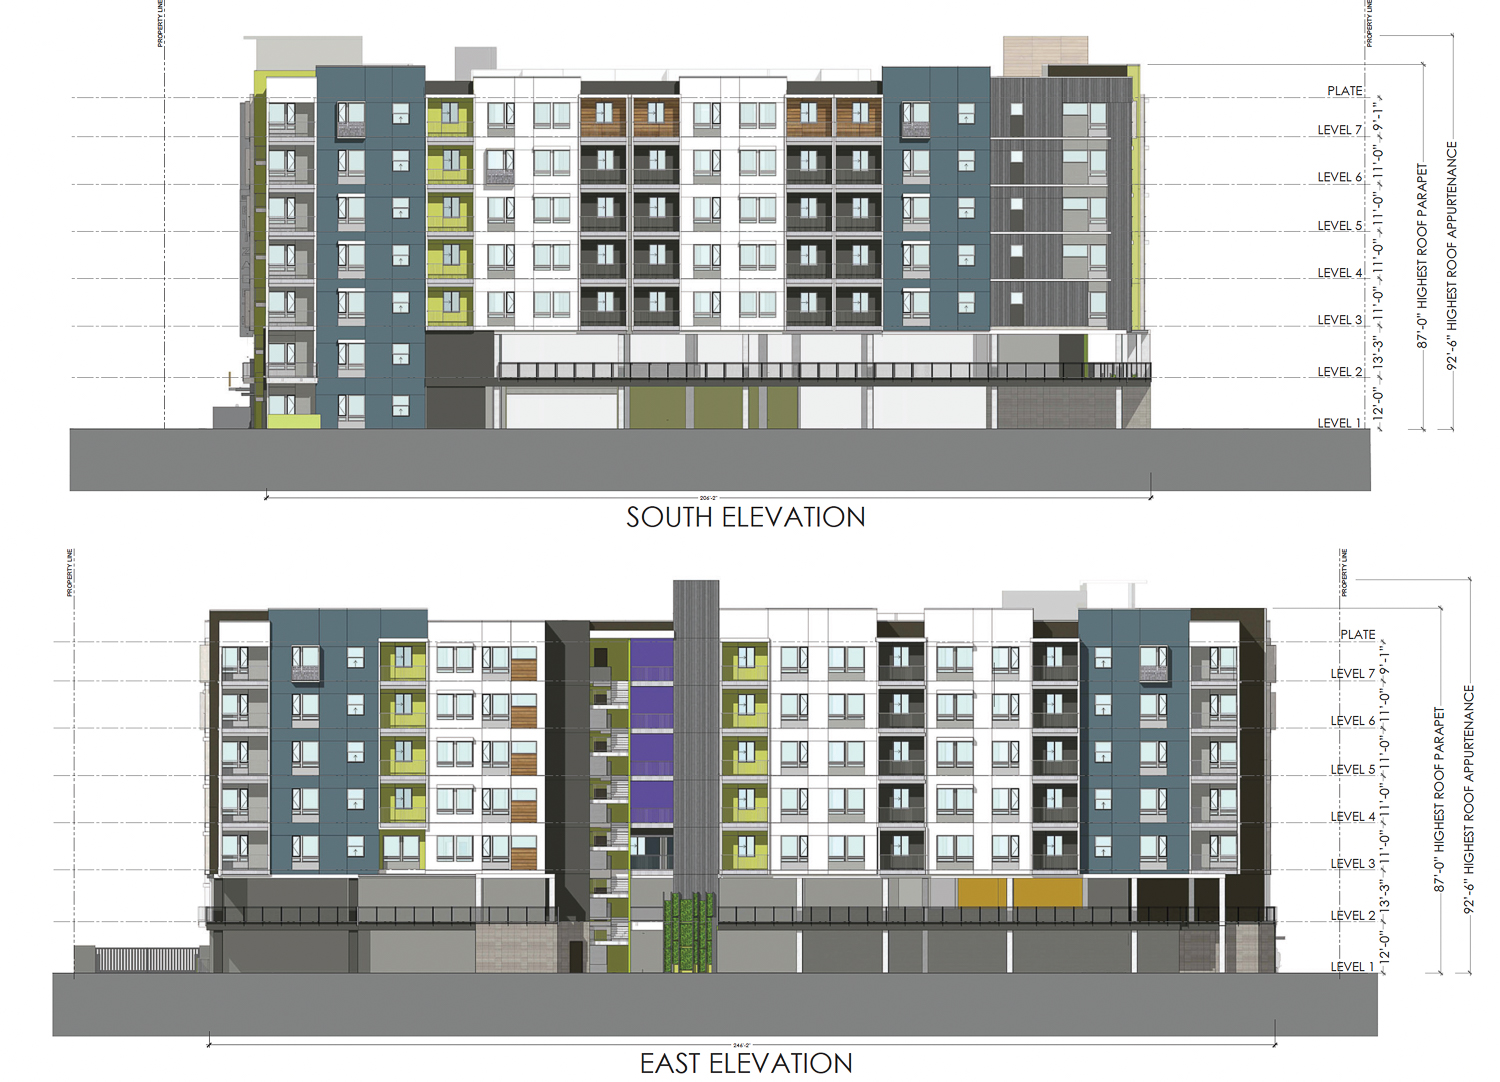 1050 Saint Elizabeth Drive facade elevations, illustration by DNA Design and Architecture